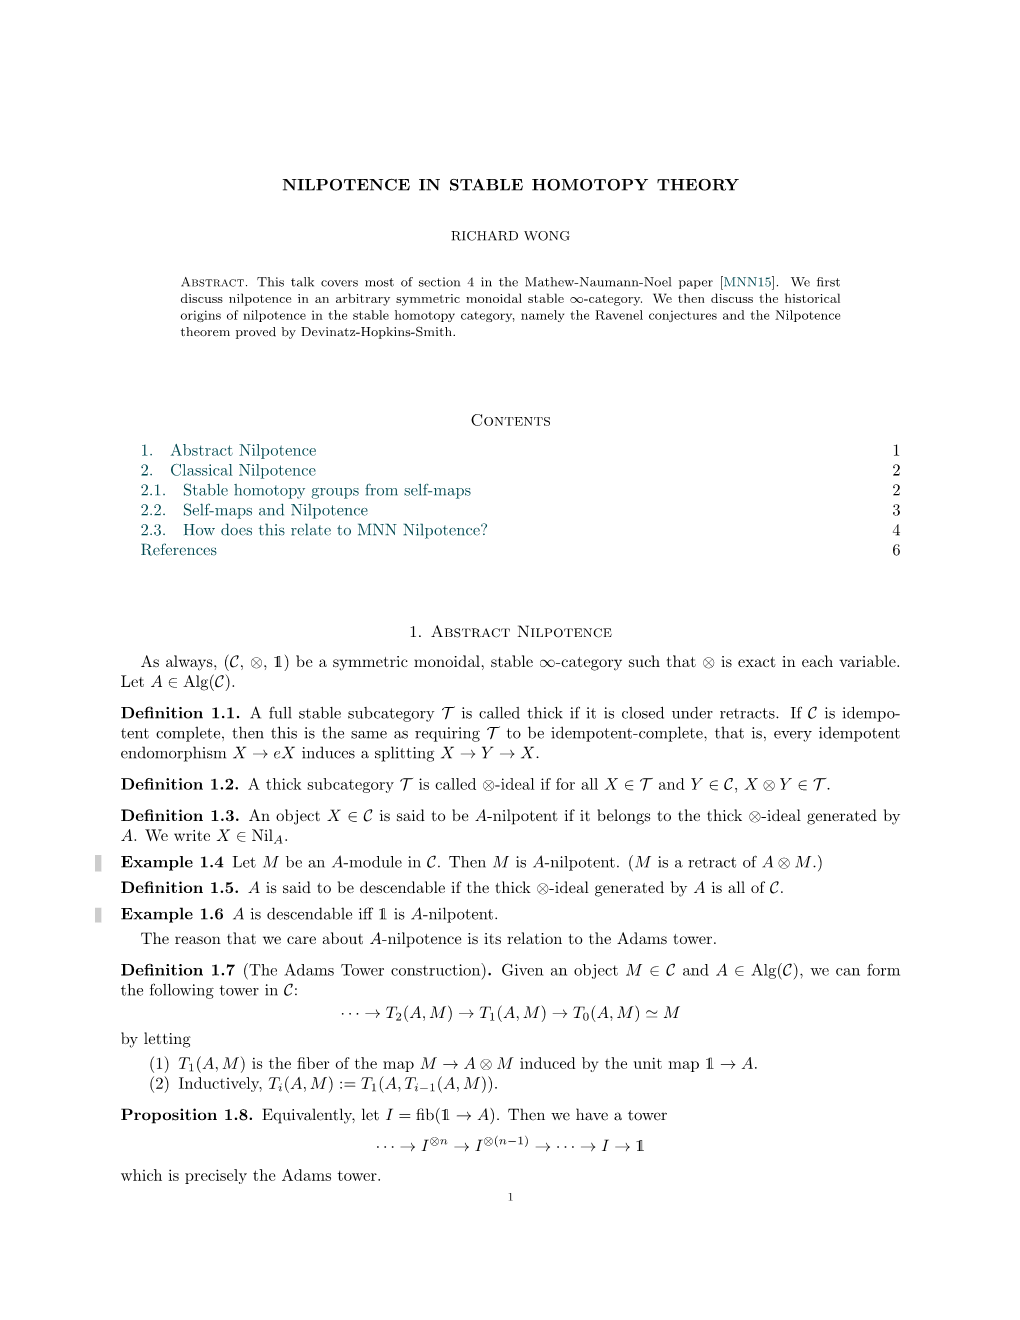 Nilpotence in Stable Homotopy Theory